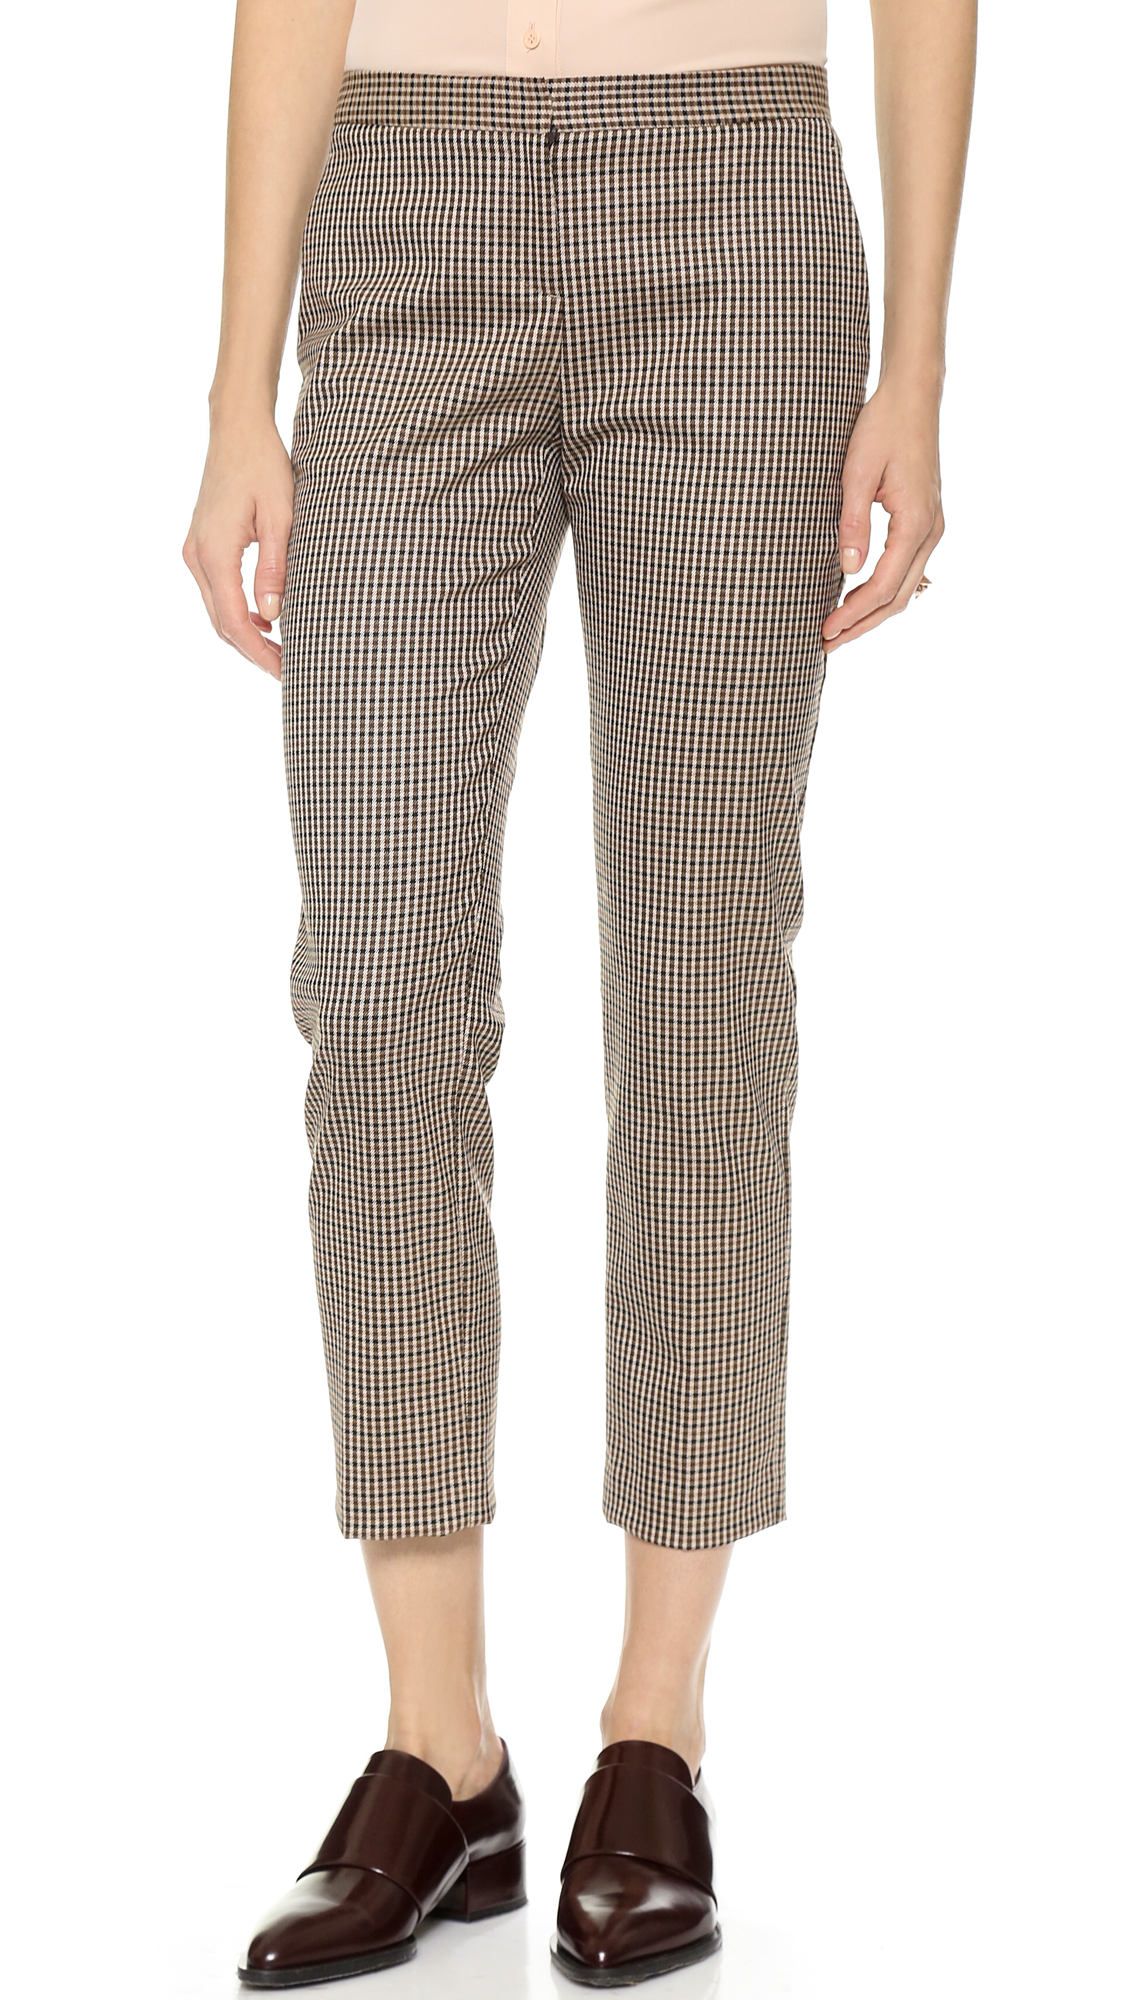 Lyst - Theory Intrigued Item Cropped Pants Brown Multi in Brown